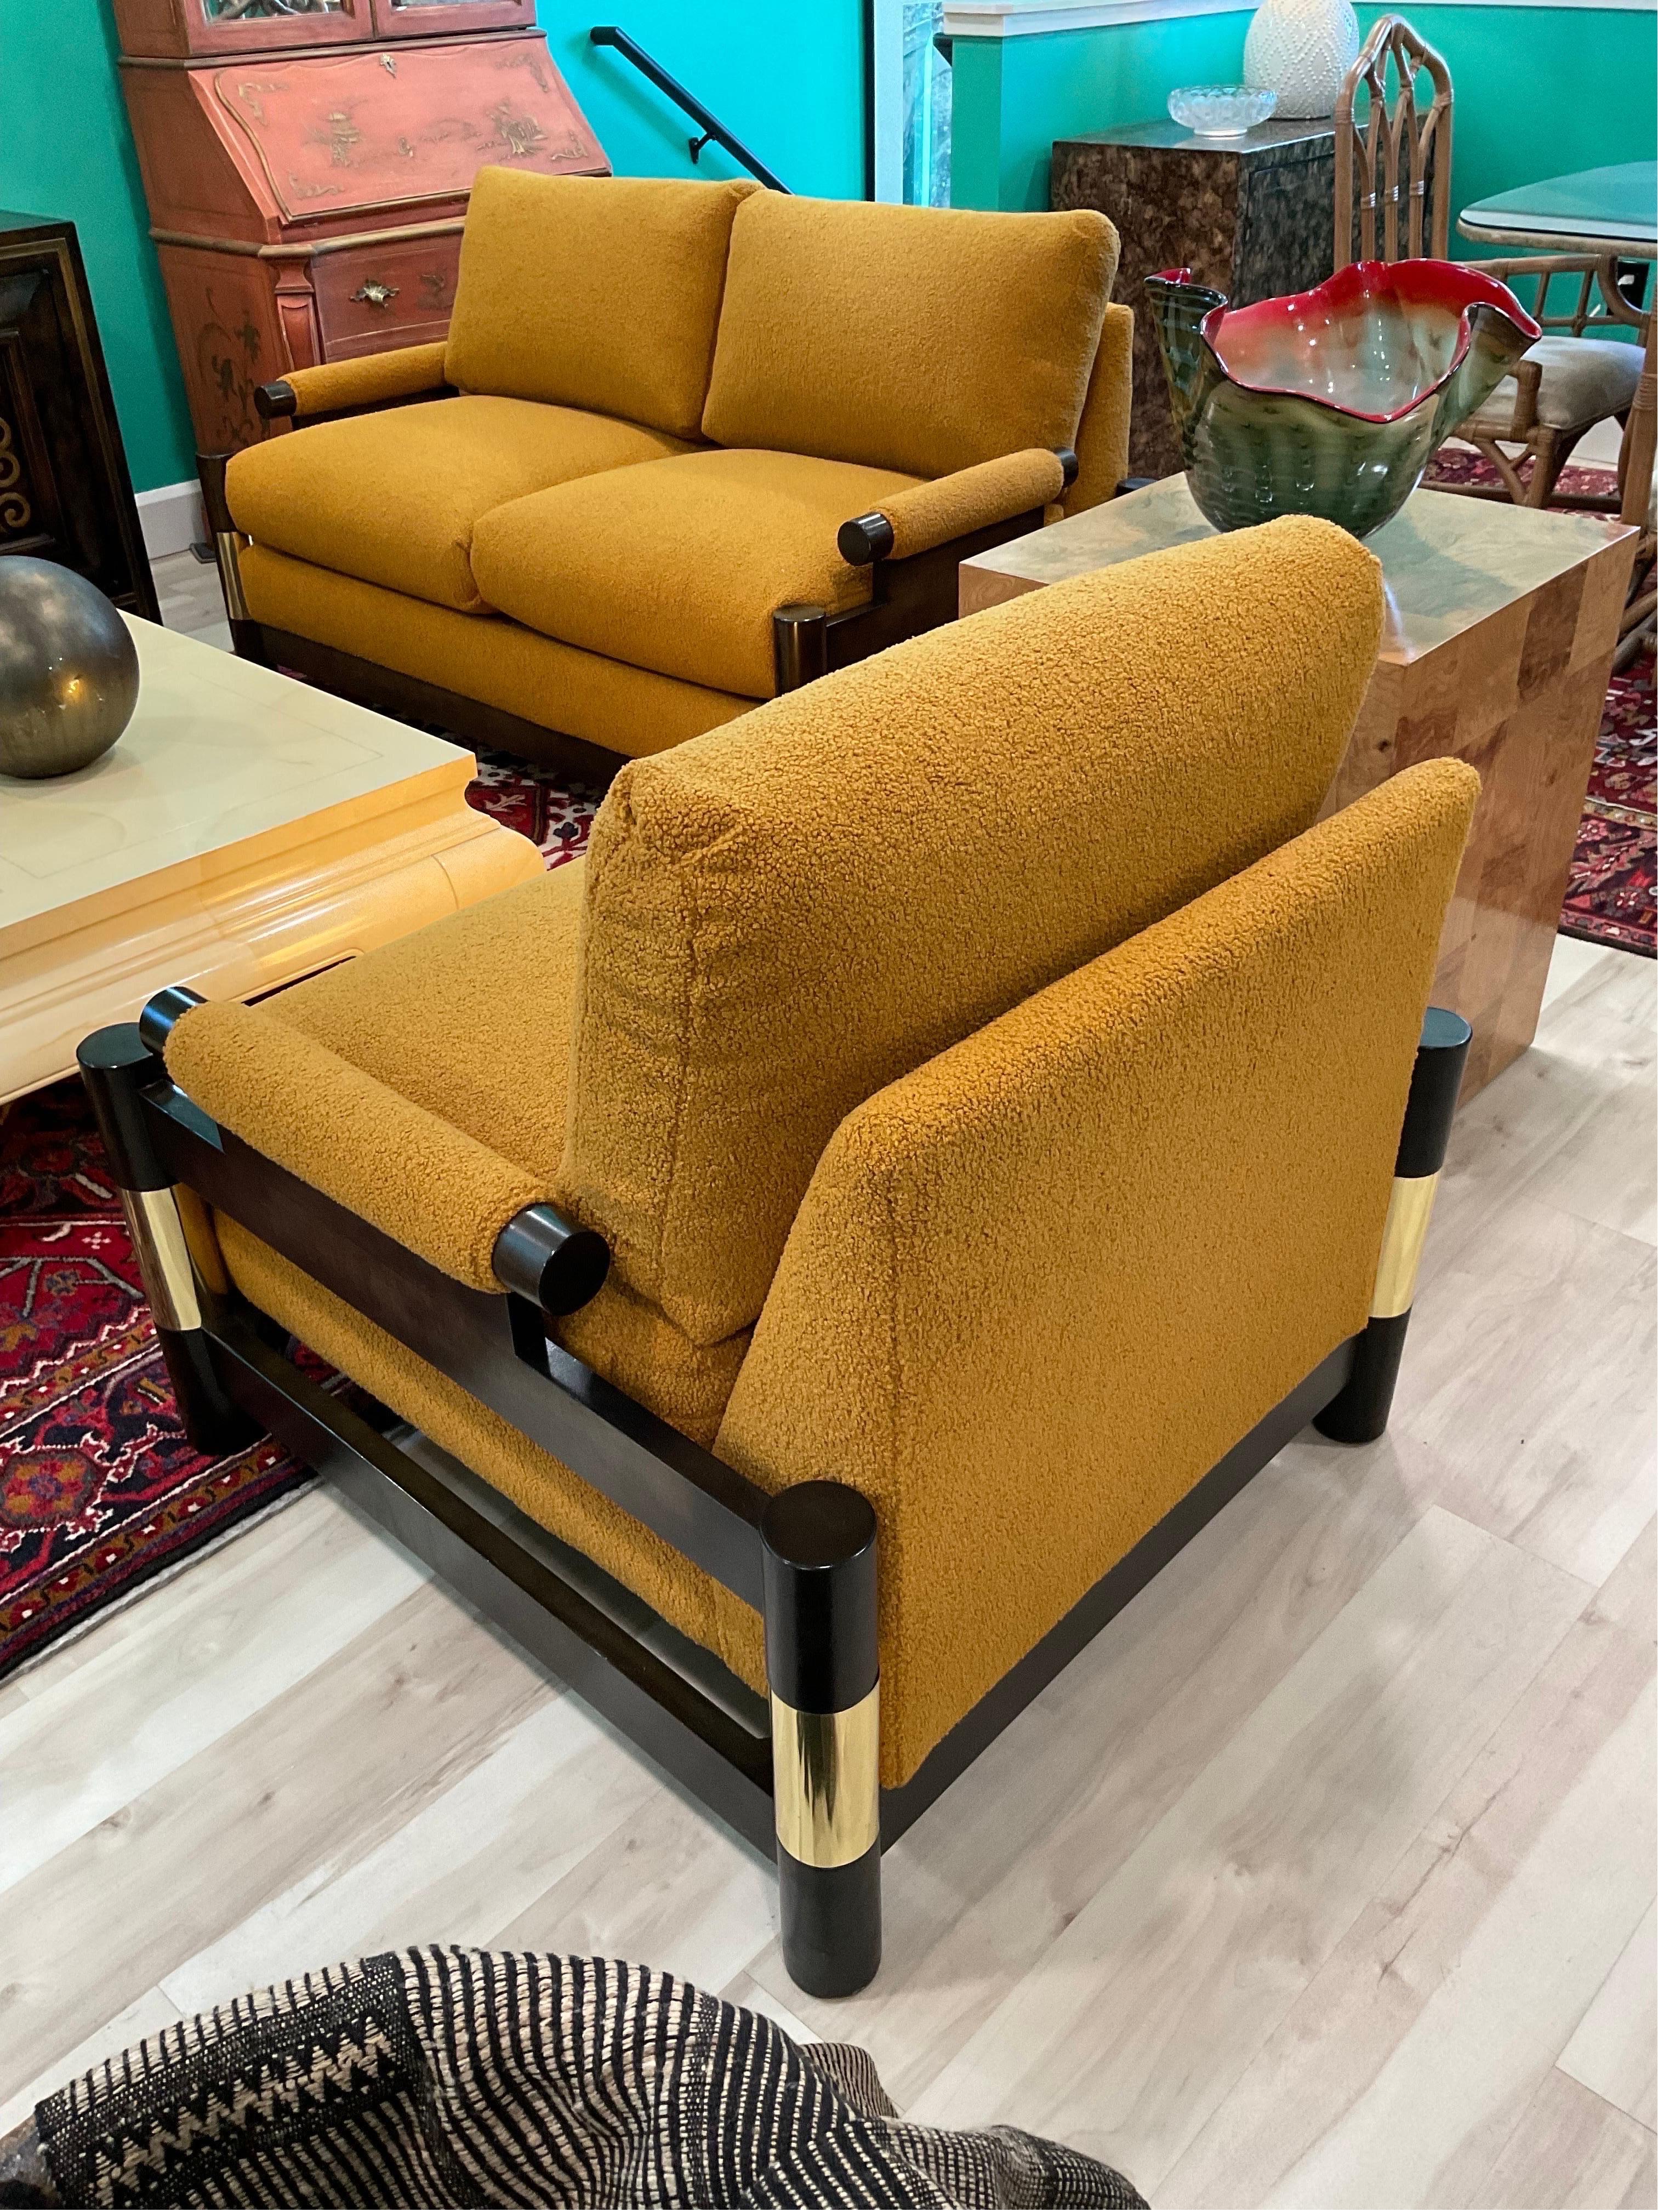 Spectacular Floating Pagoda Club Chair by Carson’s of Highpoint. Matching sofa and loveseat in separate listings. Extraordinary original vintage fabric is near flawless if not just that. No signs of fading, loss of cushion support or use. Time